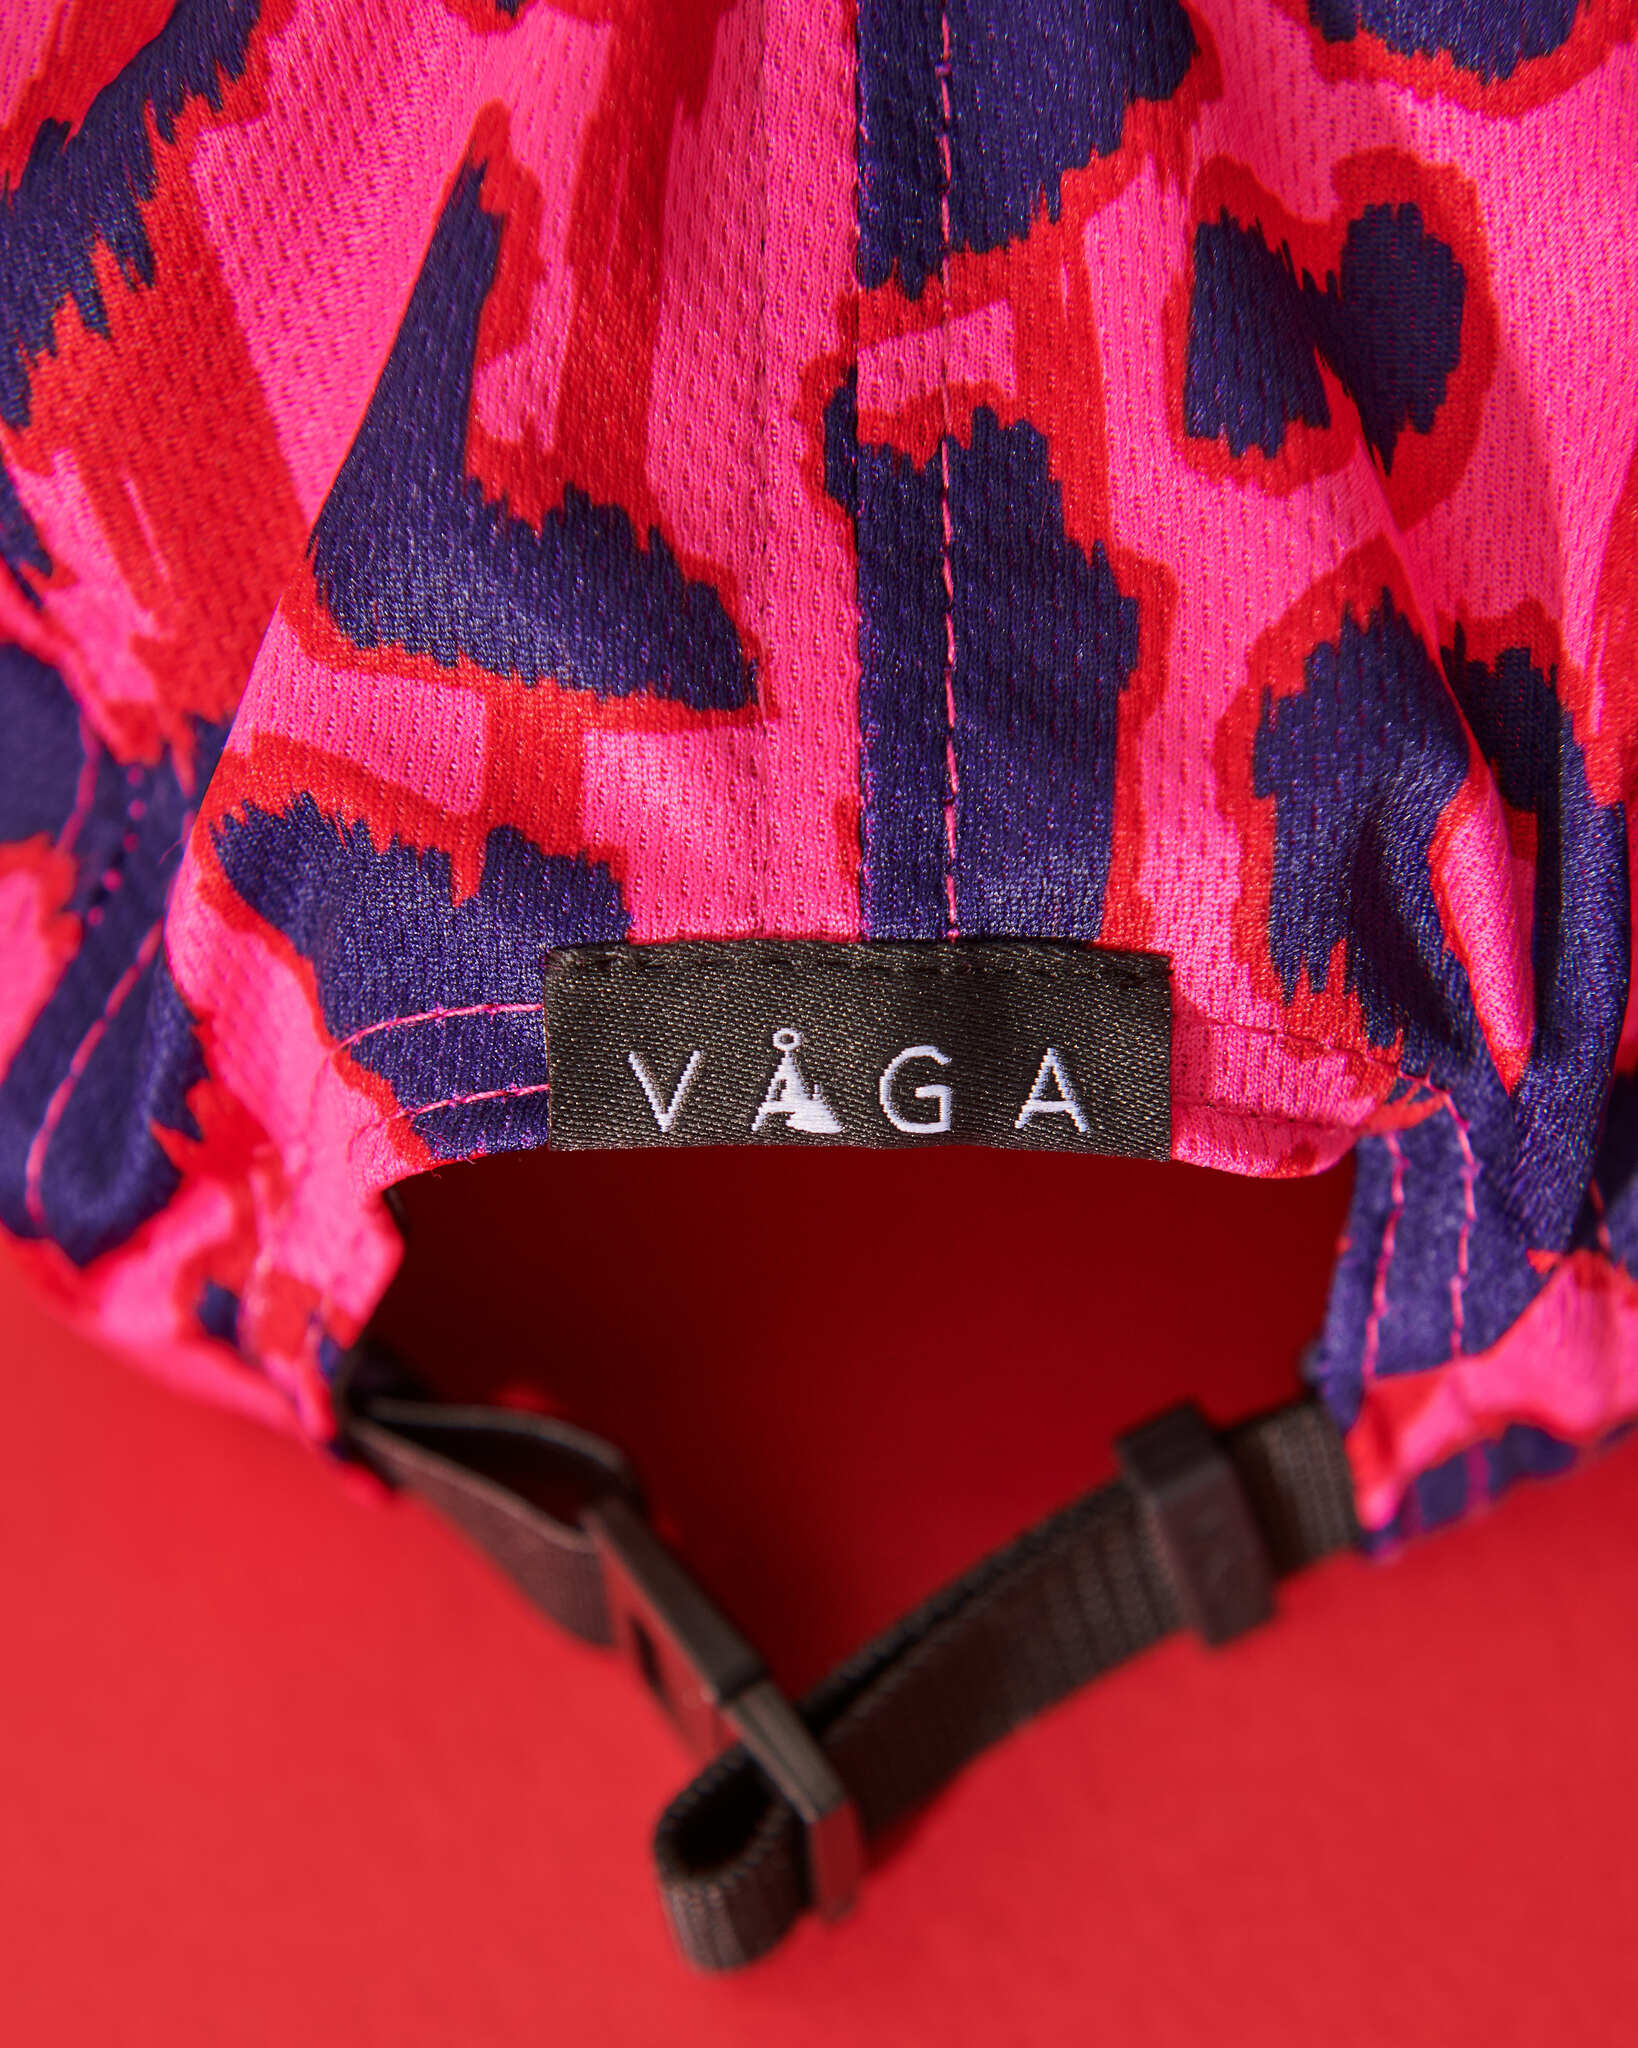 Våga Limited Edition Patterned Club Cap - Neon Pink/Flame Red/Navy